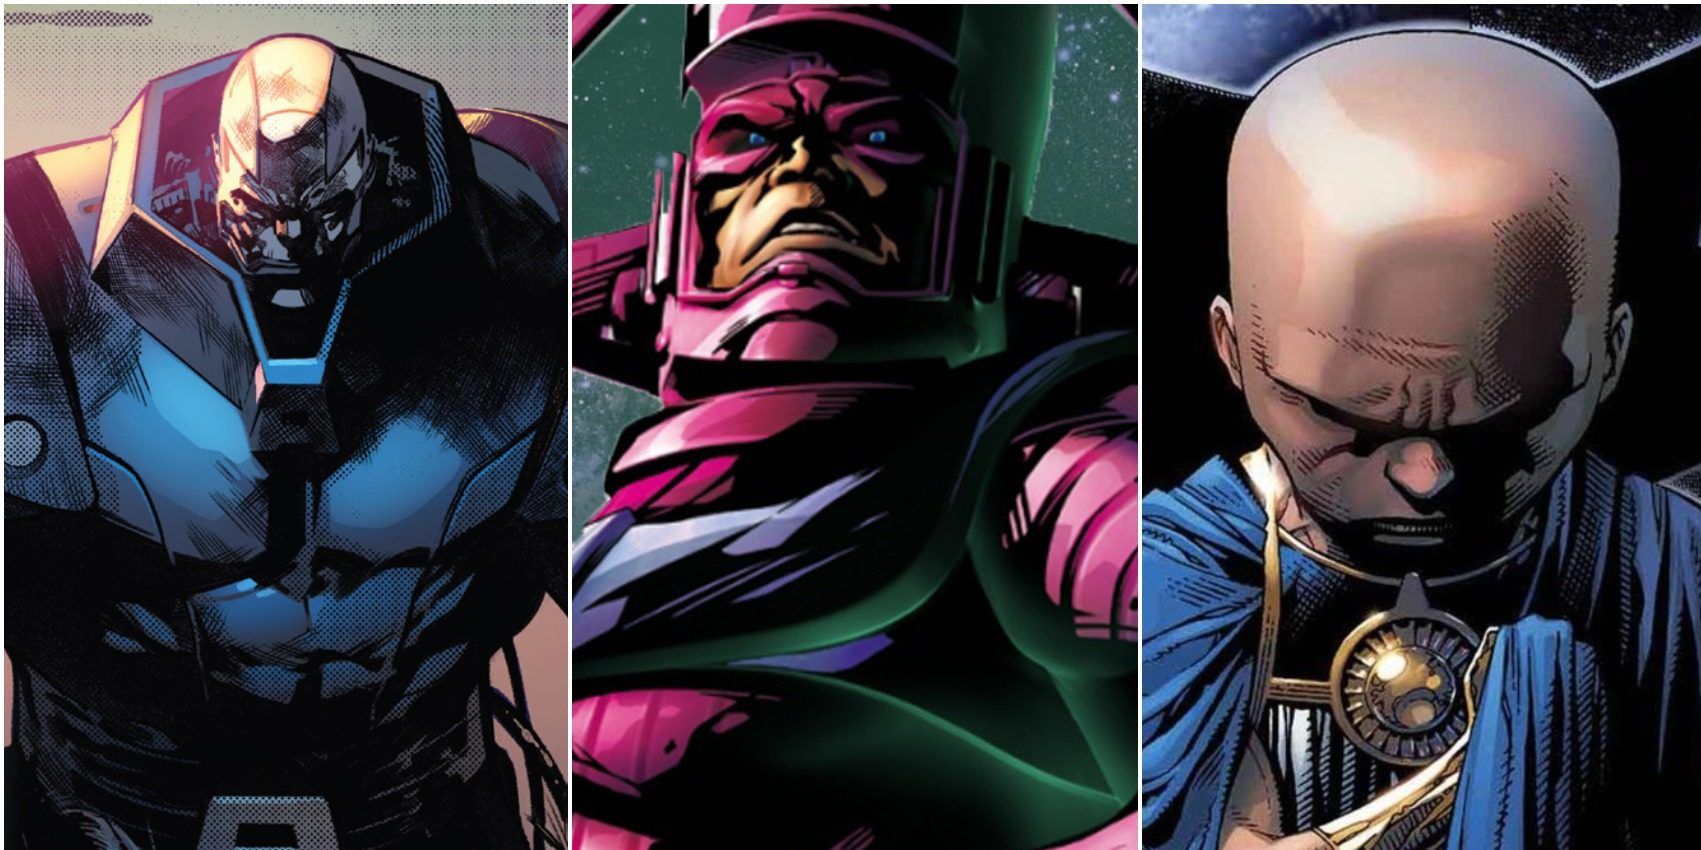 Three side by side images of Galactus, Uatu the Watcher, and Apocalypse in Marvel Comics